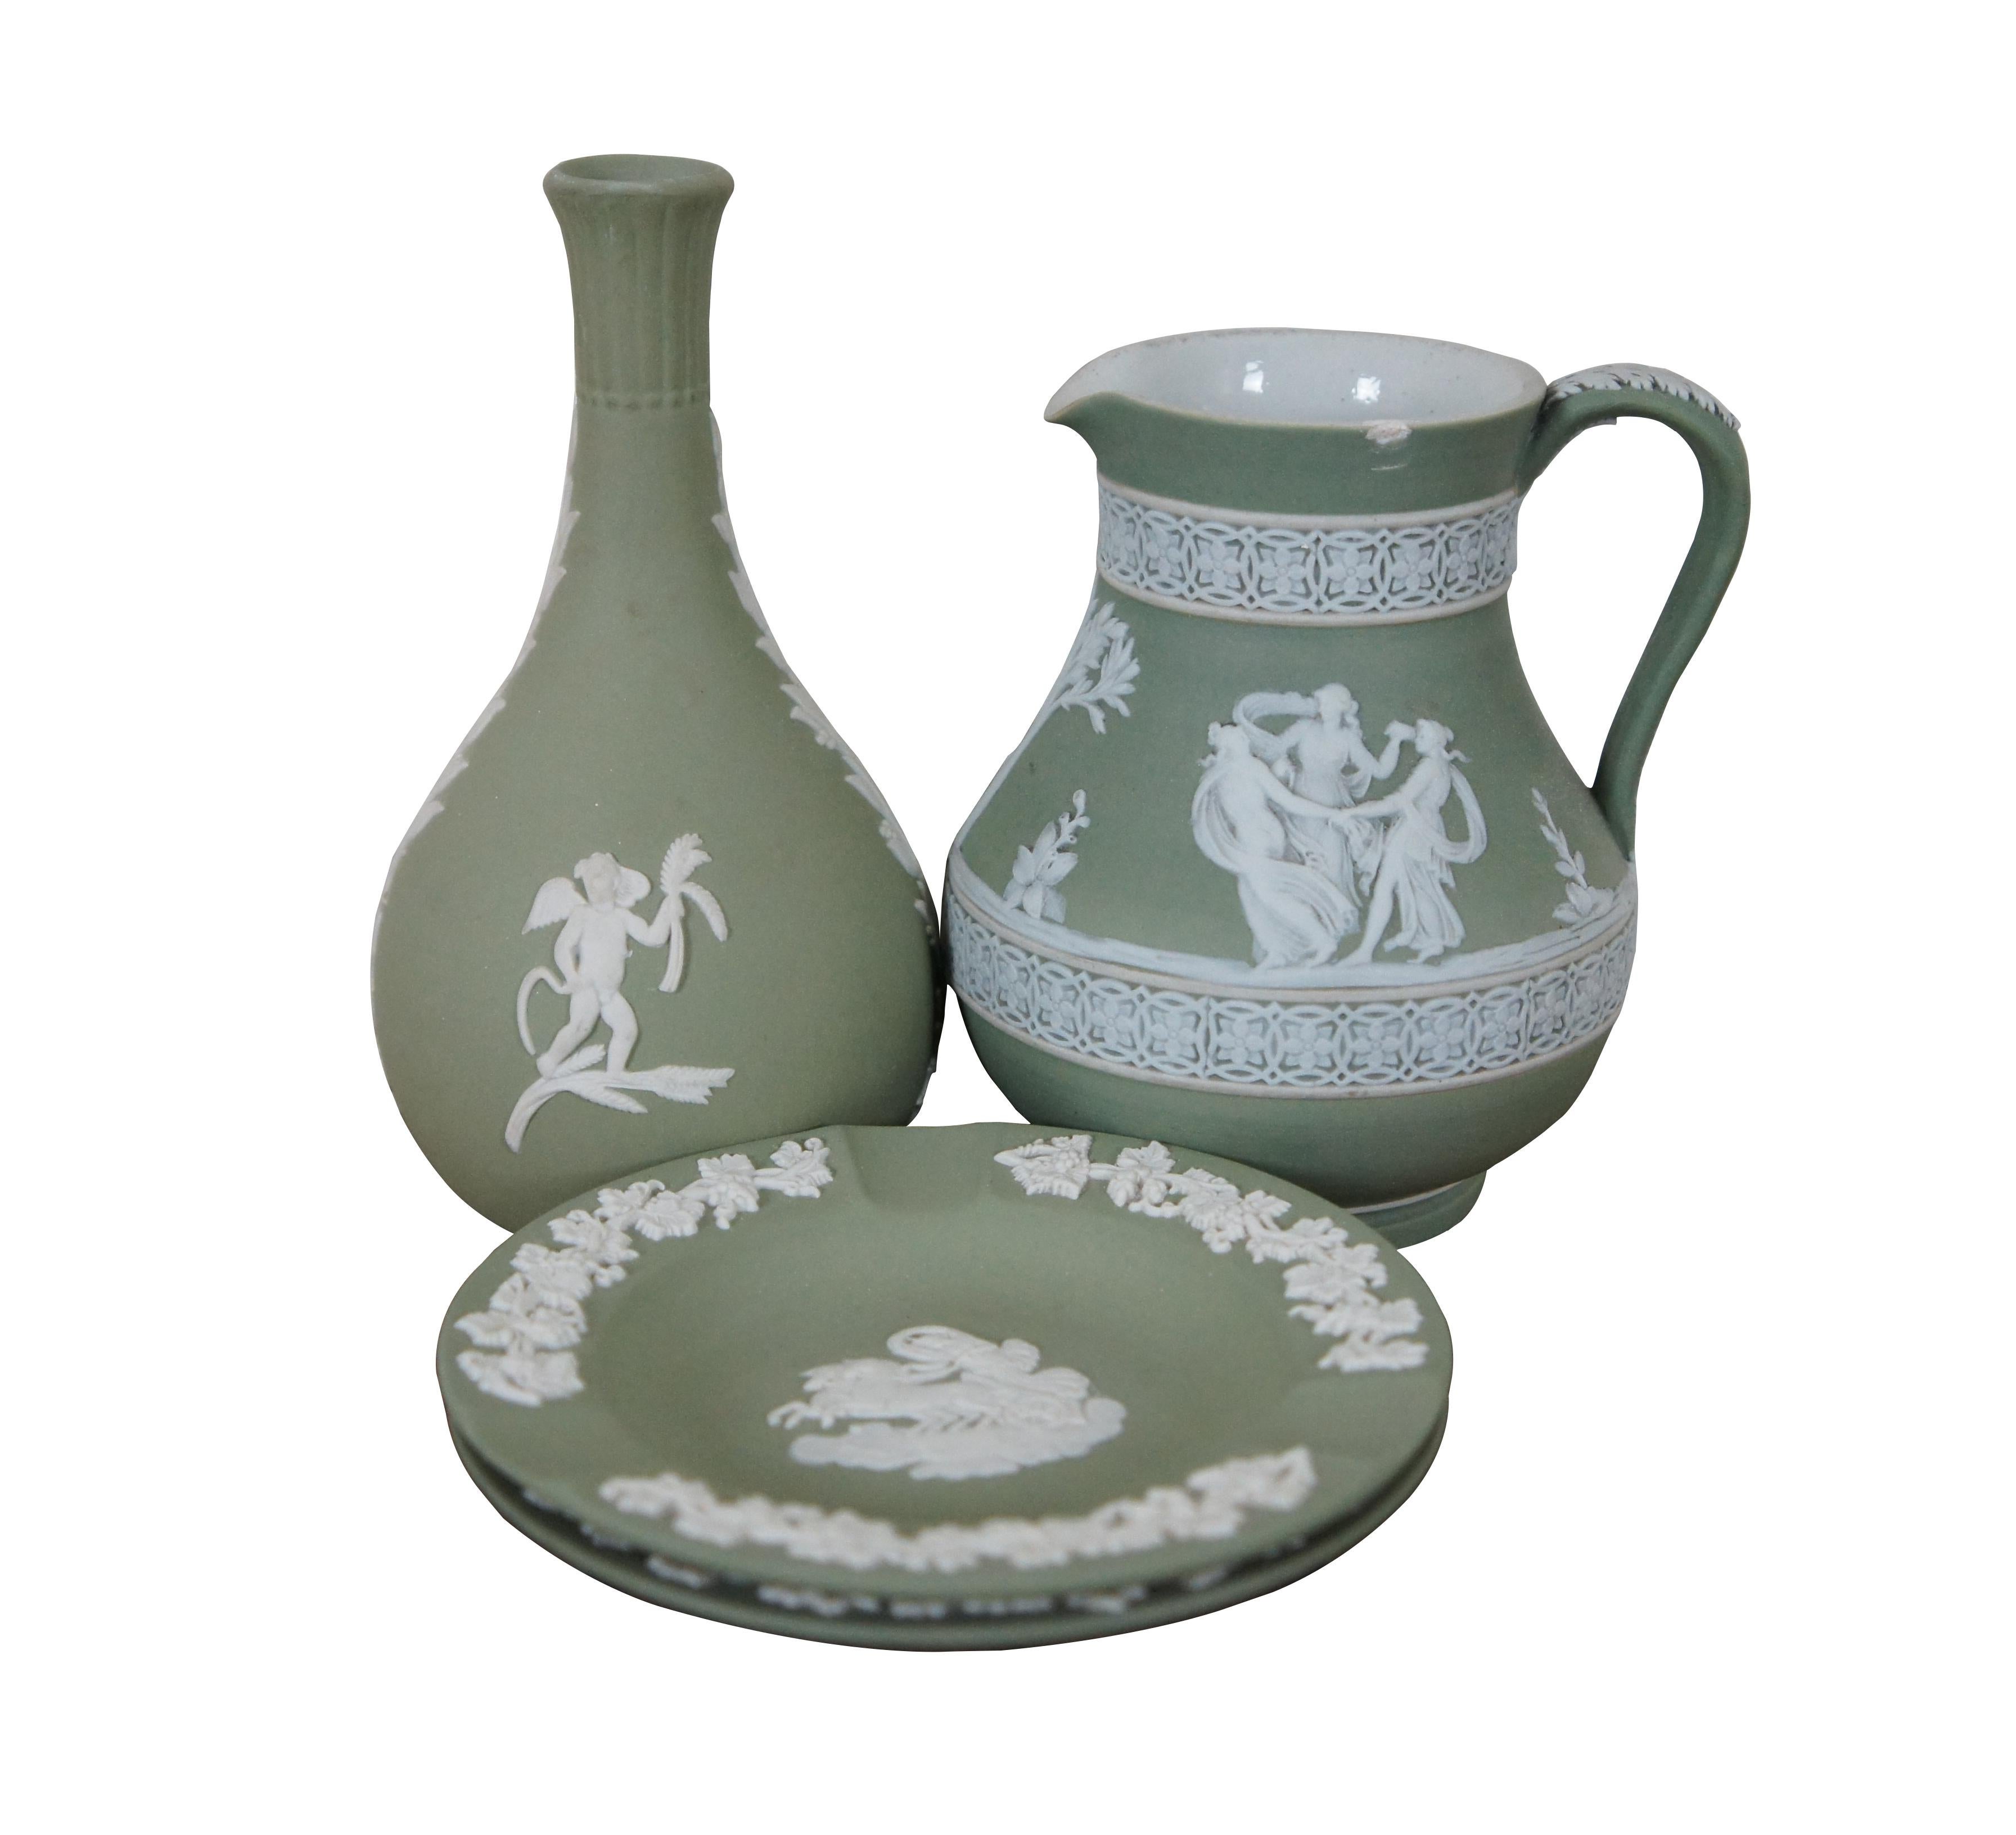 Lot of four pieces of wedgwood cream on sage green Jasperware, including a bud vase, small pitcher, round dish, and individual ashtray.

Measures : Pitcher - 4.25” x 4” x 4.5” / Bud Vase - 3” x 5.5” / Round Dishes - 4.5” x 0.5” (Width x Depth x